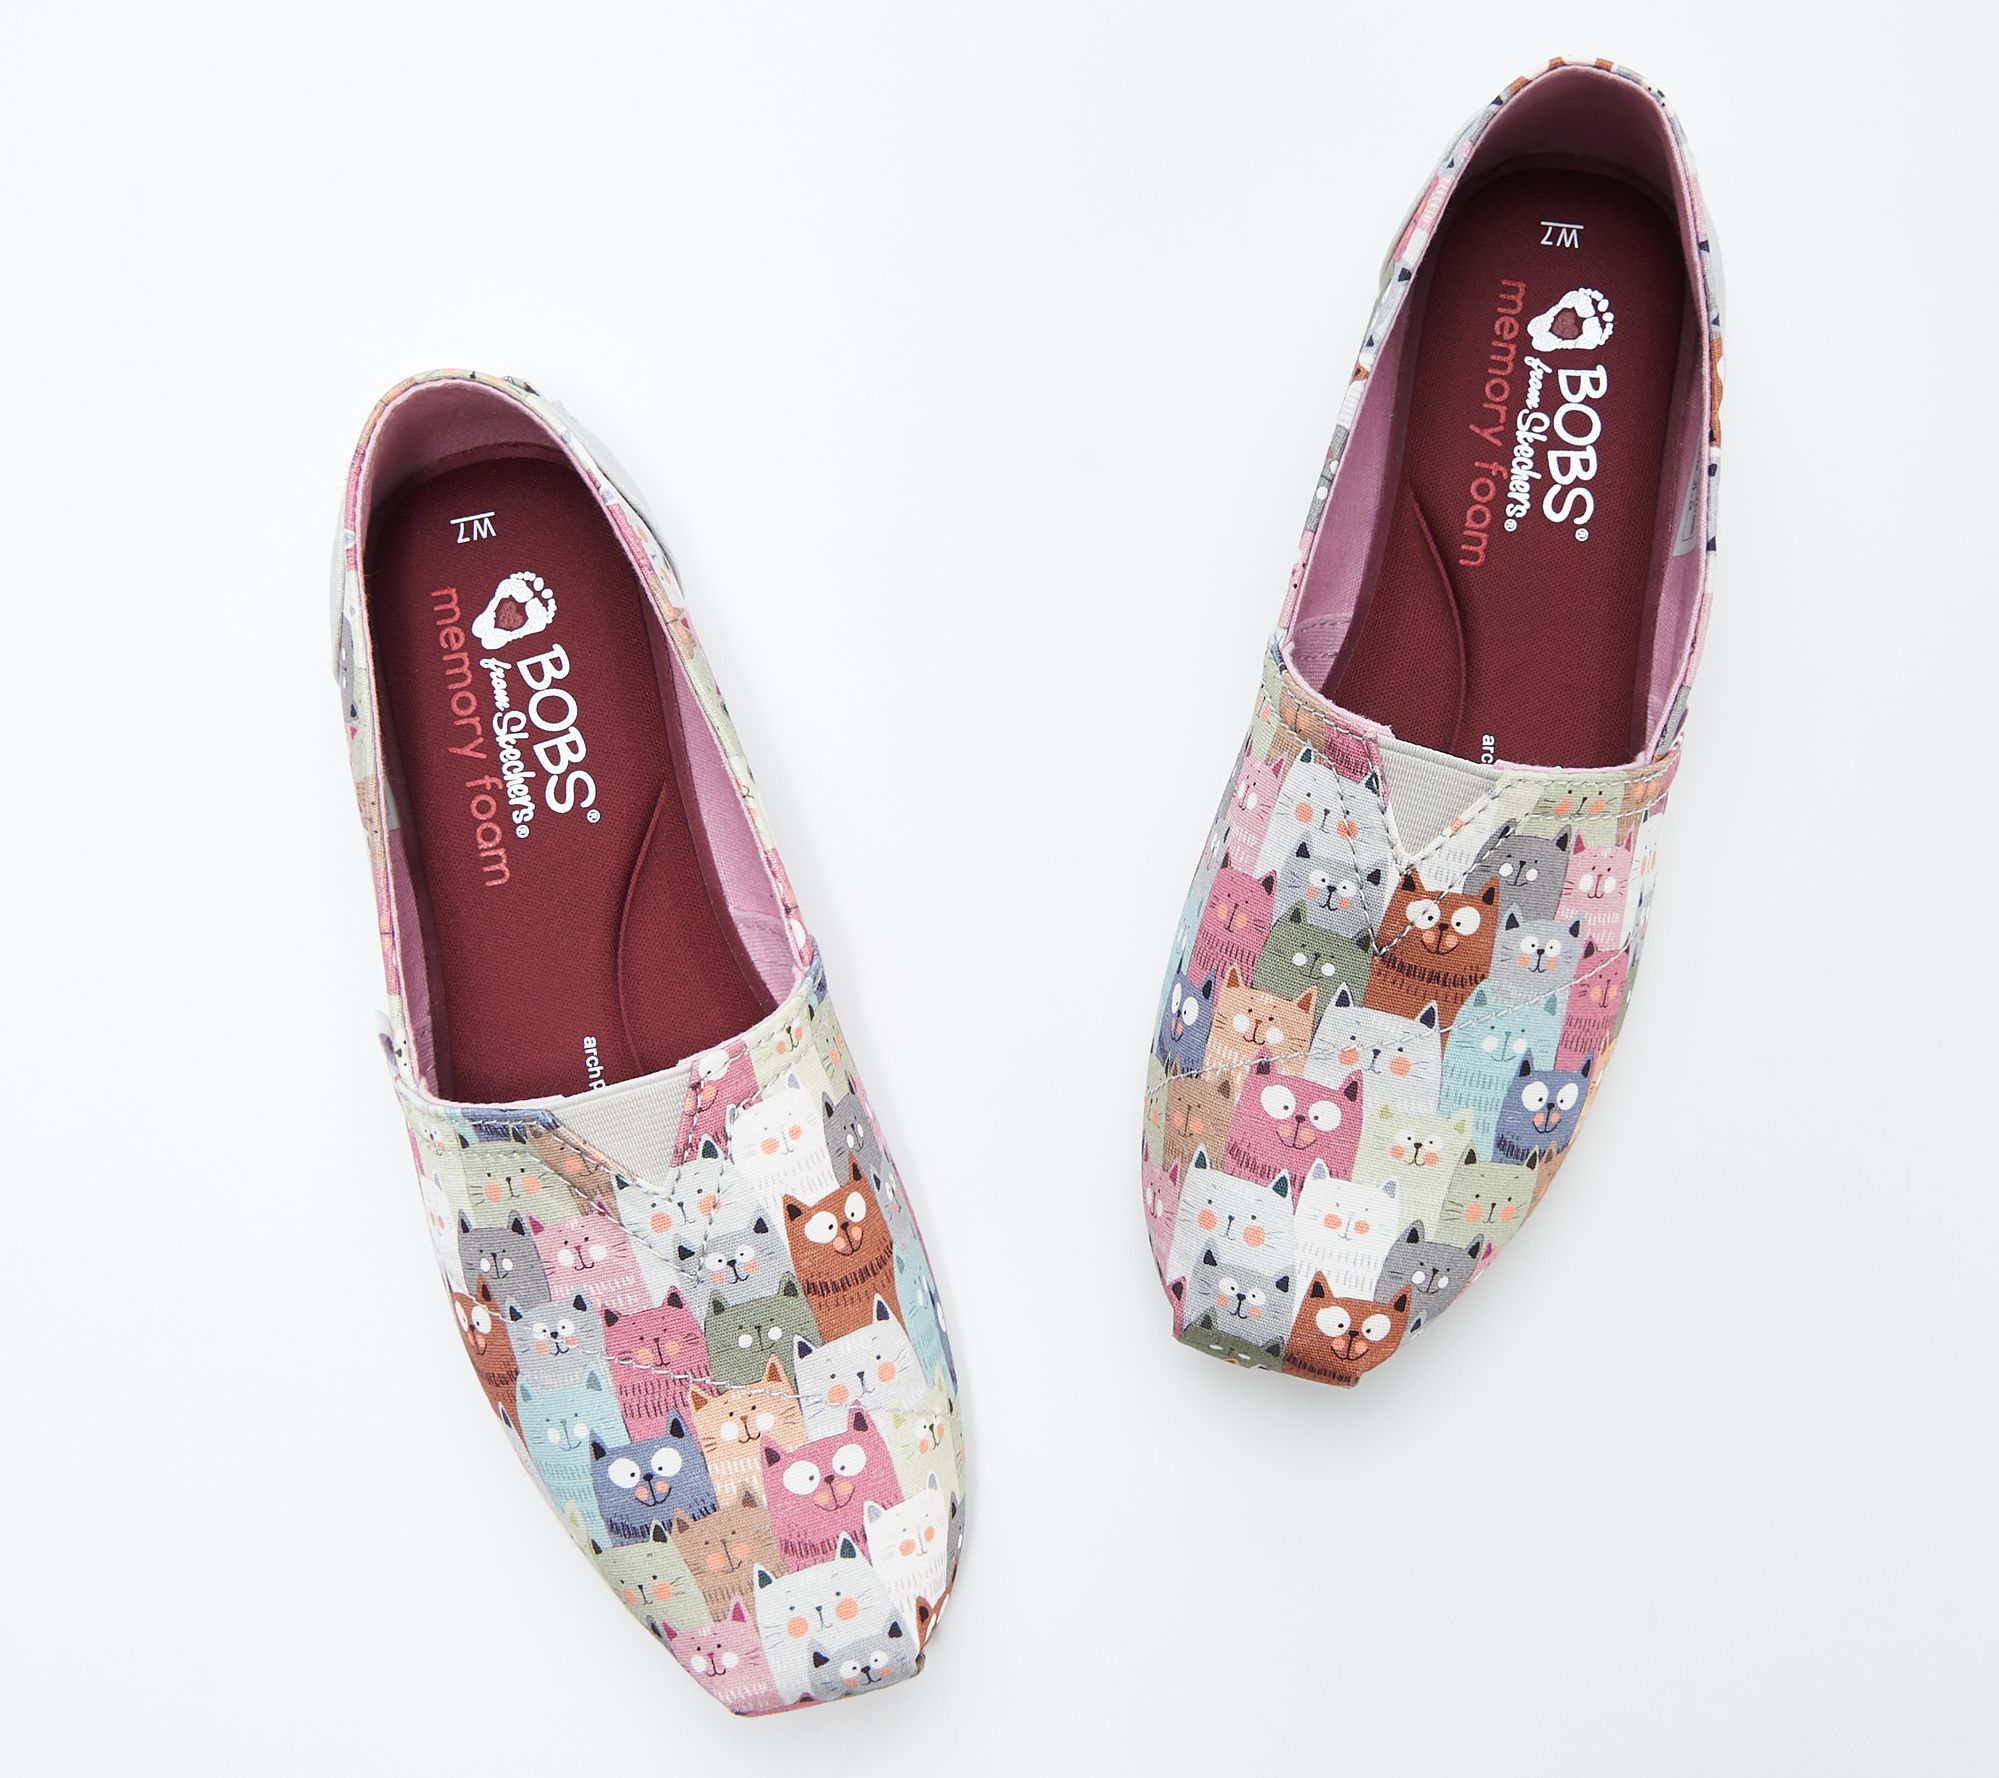  Skechers  BOBs Slip On Shoes  Kitty  Jam Page 1  QVC com